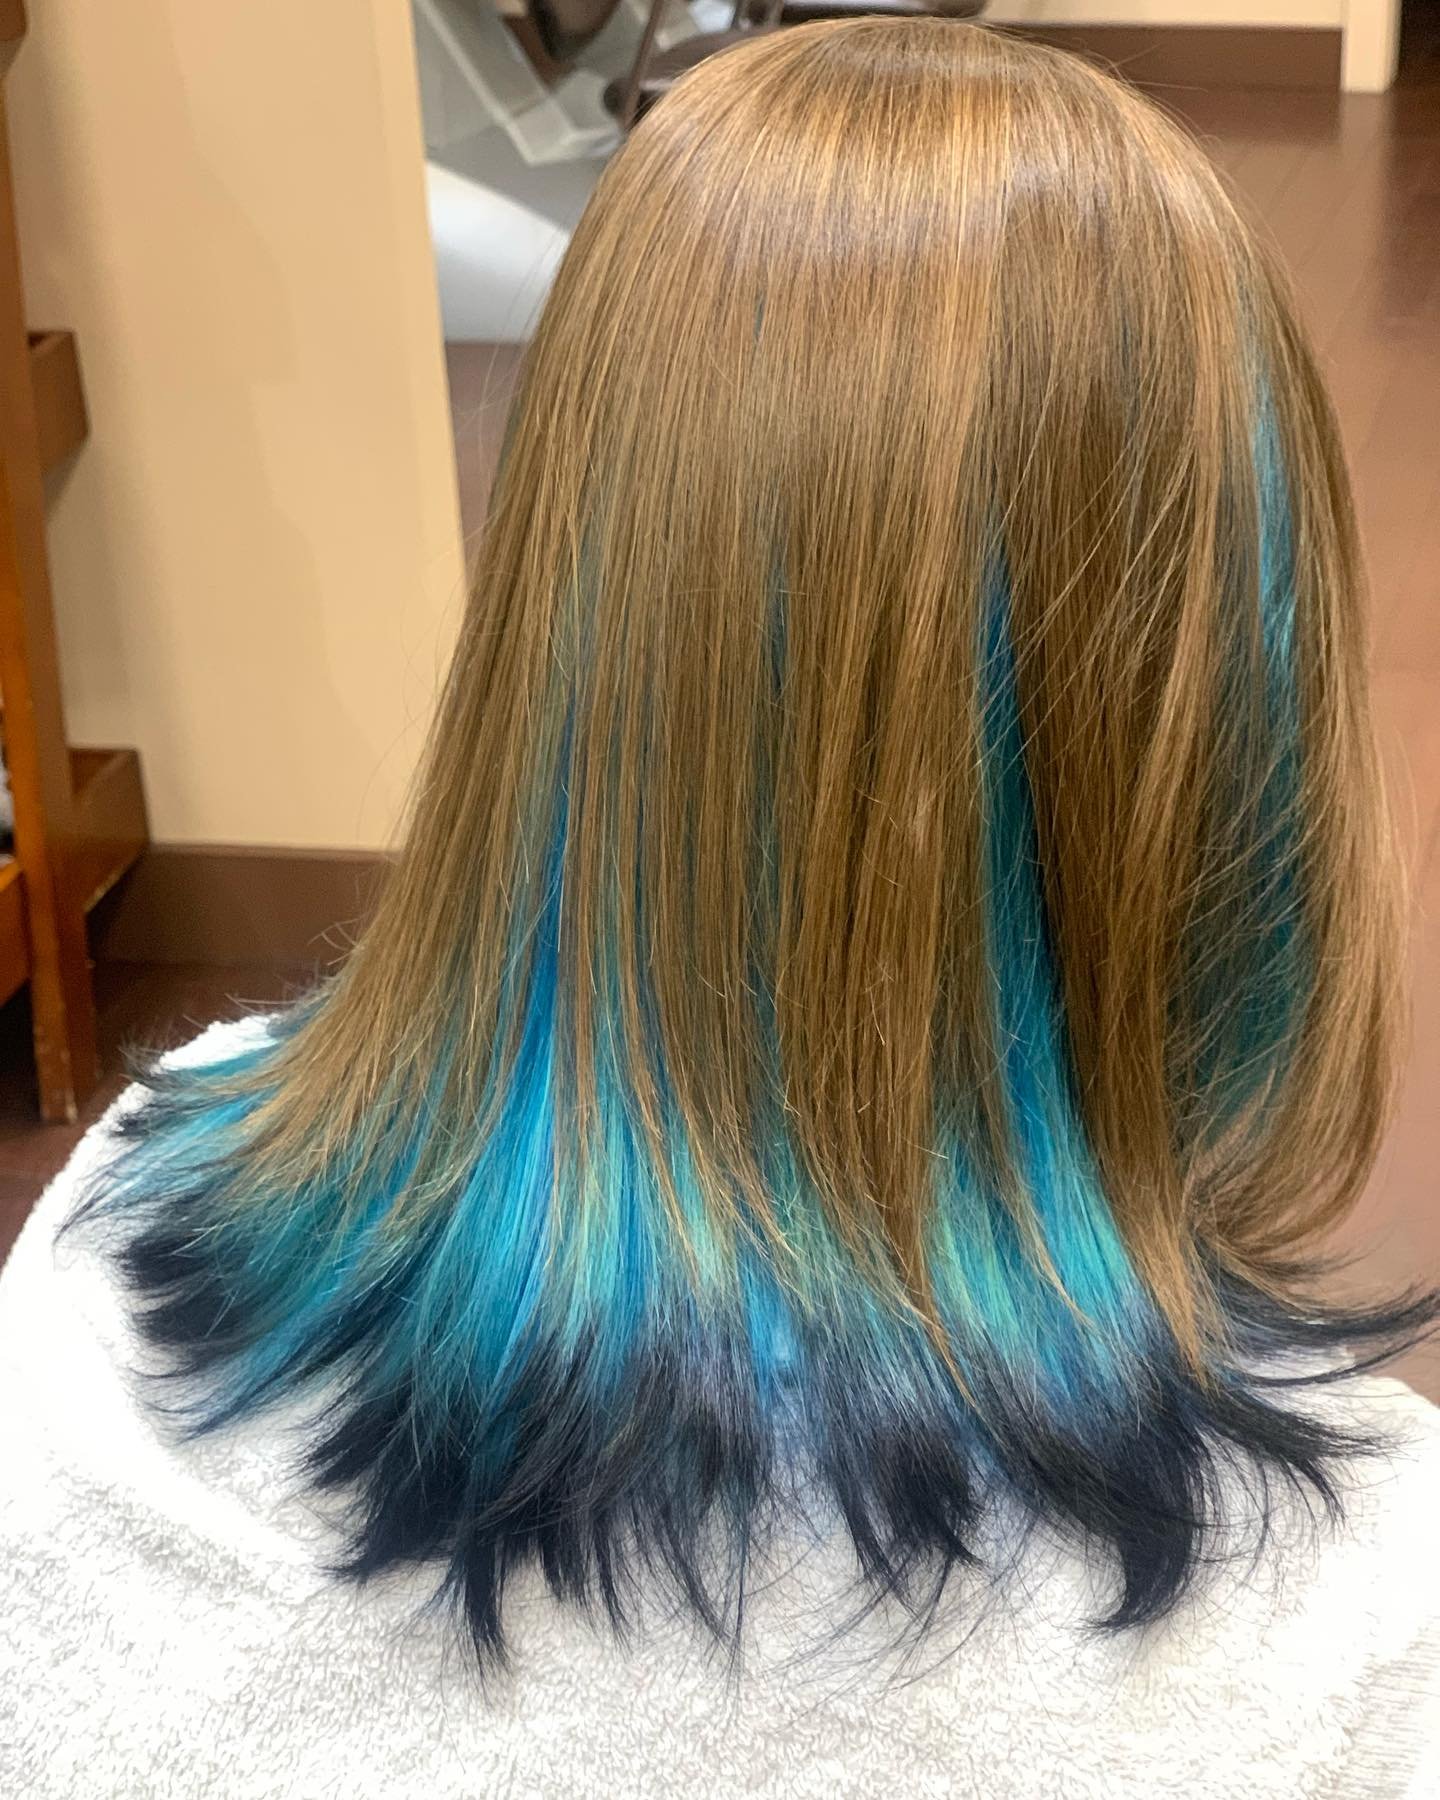 A cool peakaboo inspired gradient by Darby 🕺🏻

#color #trending #funstuff #hairsalon #bayarea